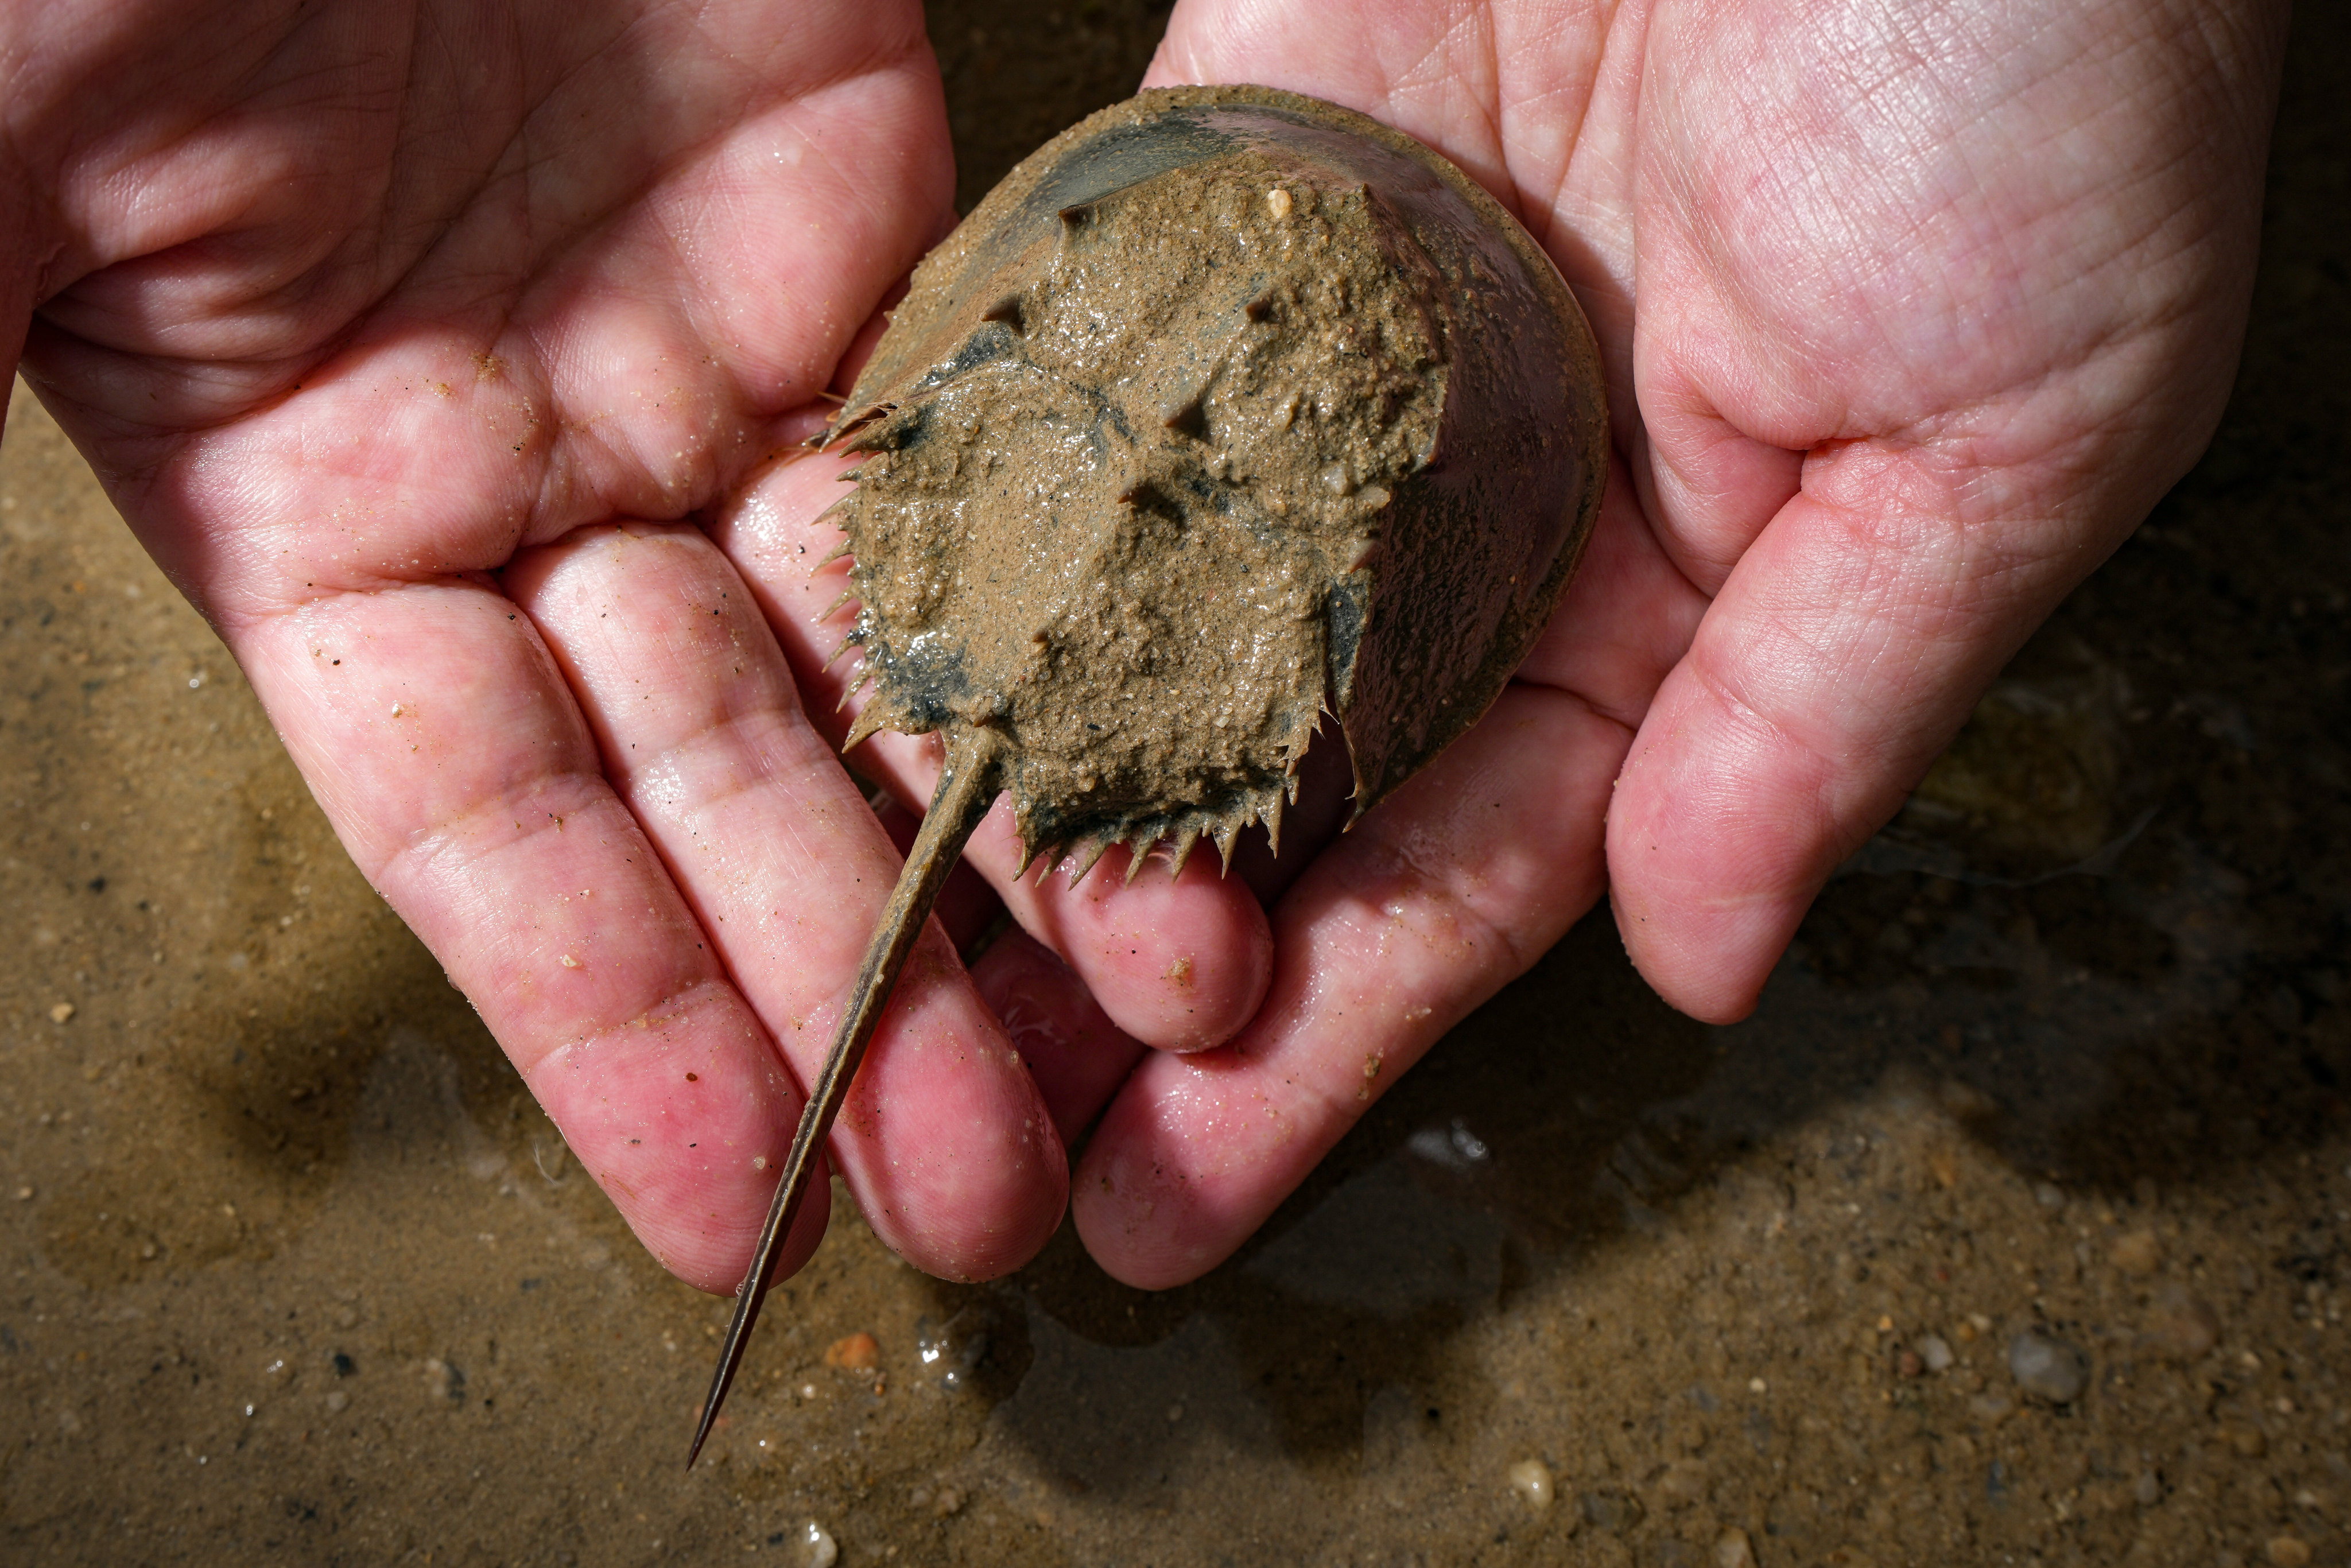 The International Union of Conservation Nature has declared tri-spine horseshoe crabs to be an endangered species and placed them on the organisation’s red list. Photo: Eugene Lee